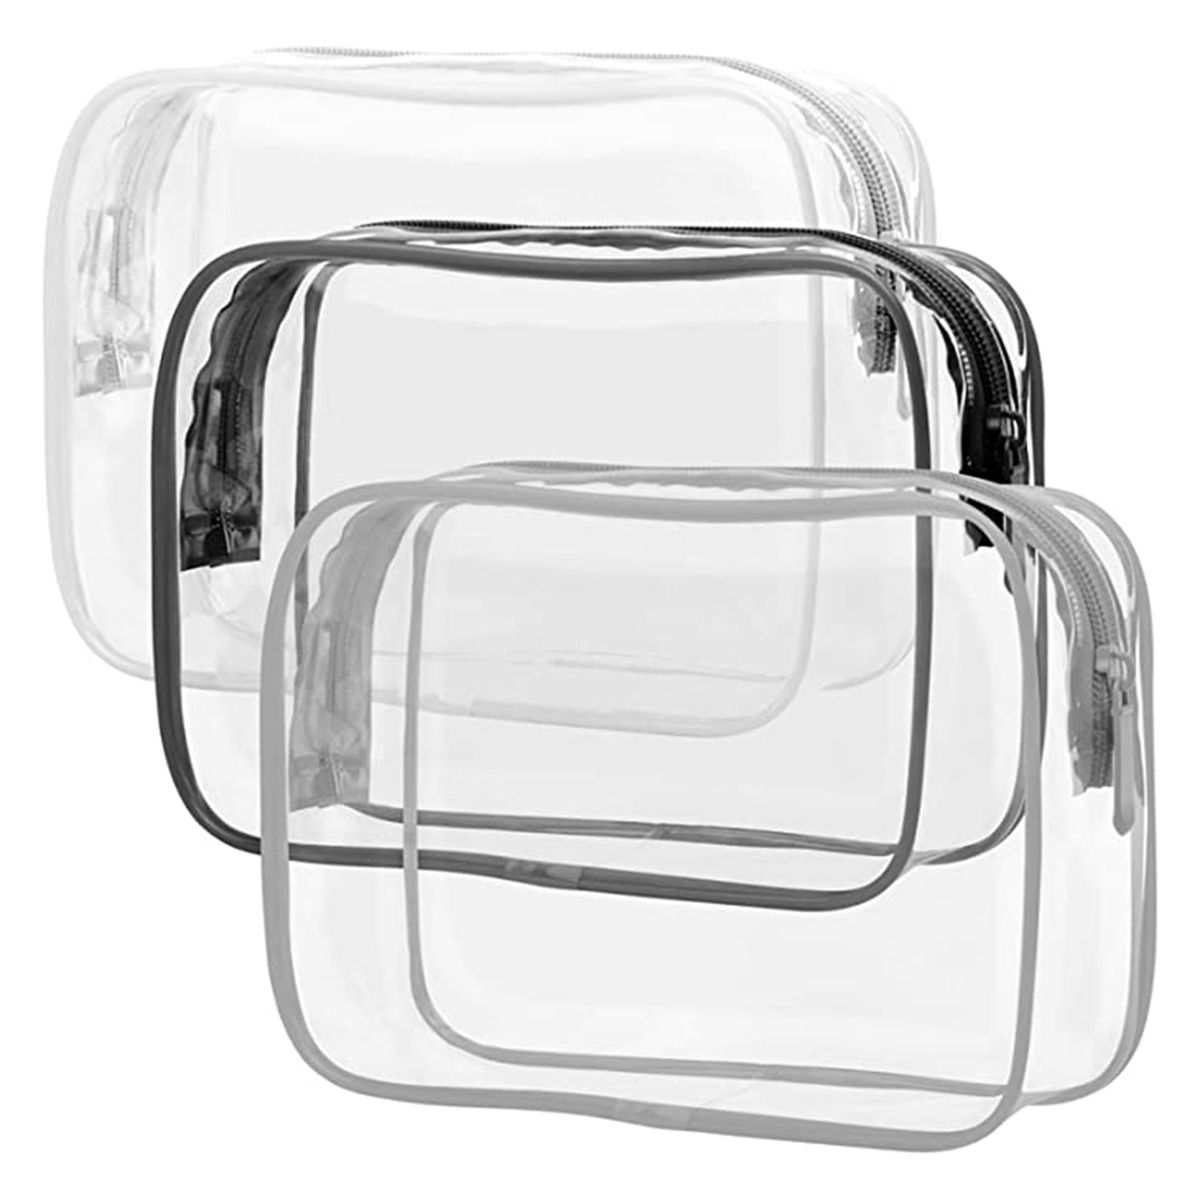 Clear Toiletry Bag, Packism 3 Pack